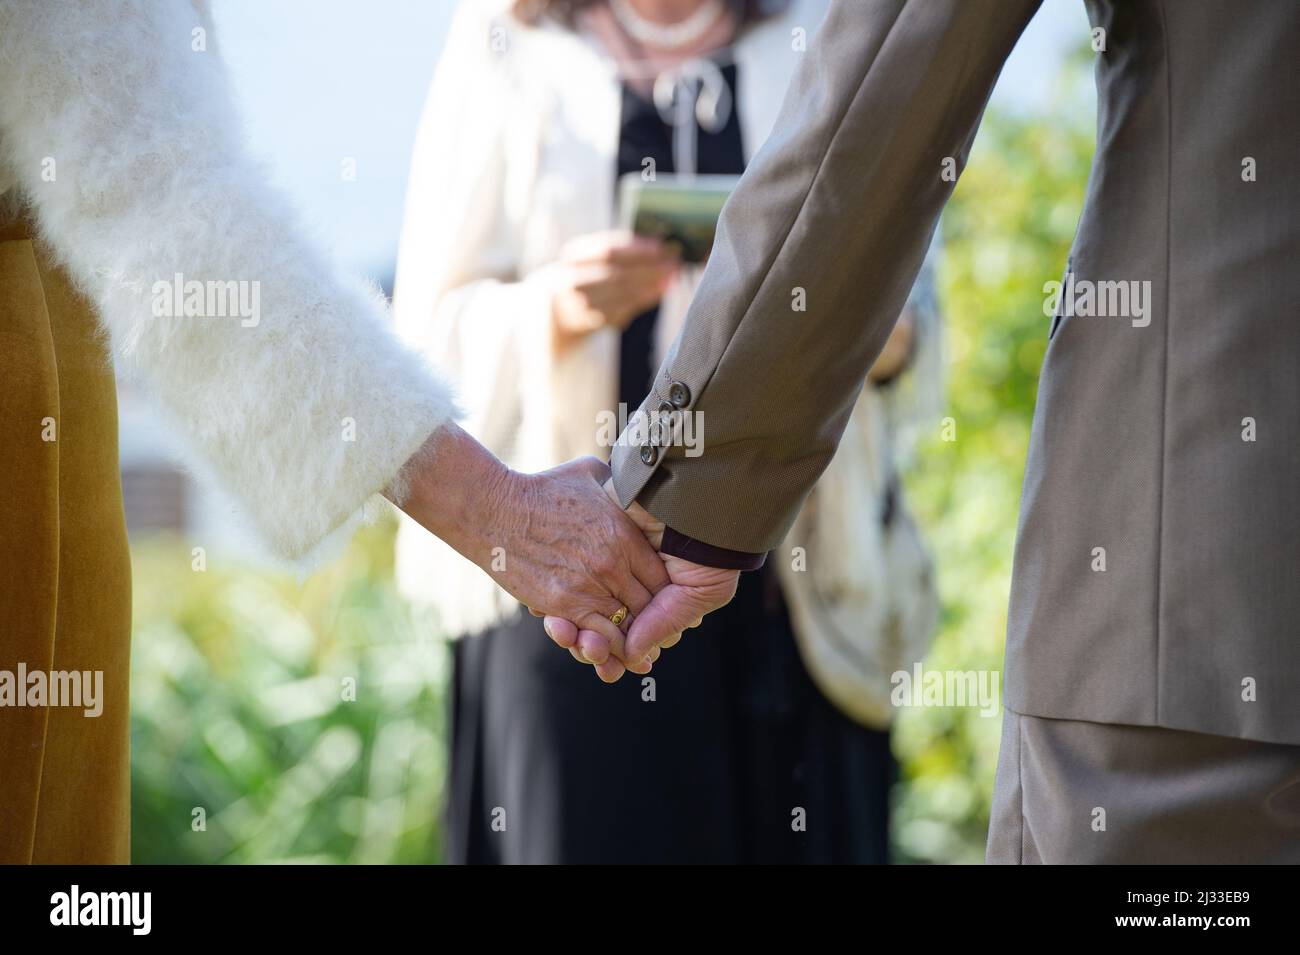 Team bride hi-res stock photography and images - Alamy